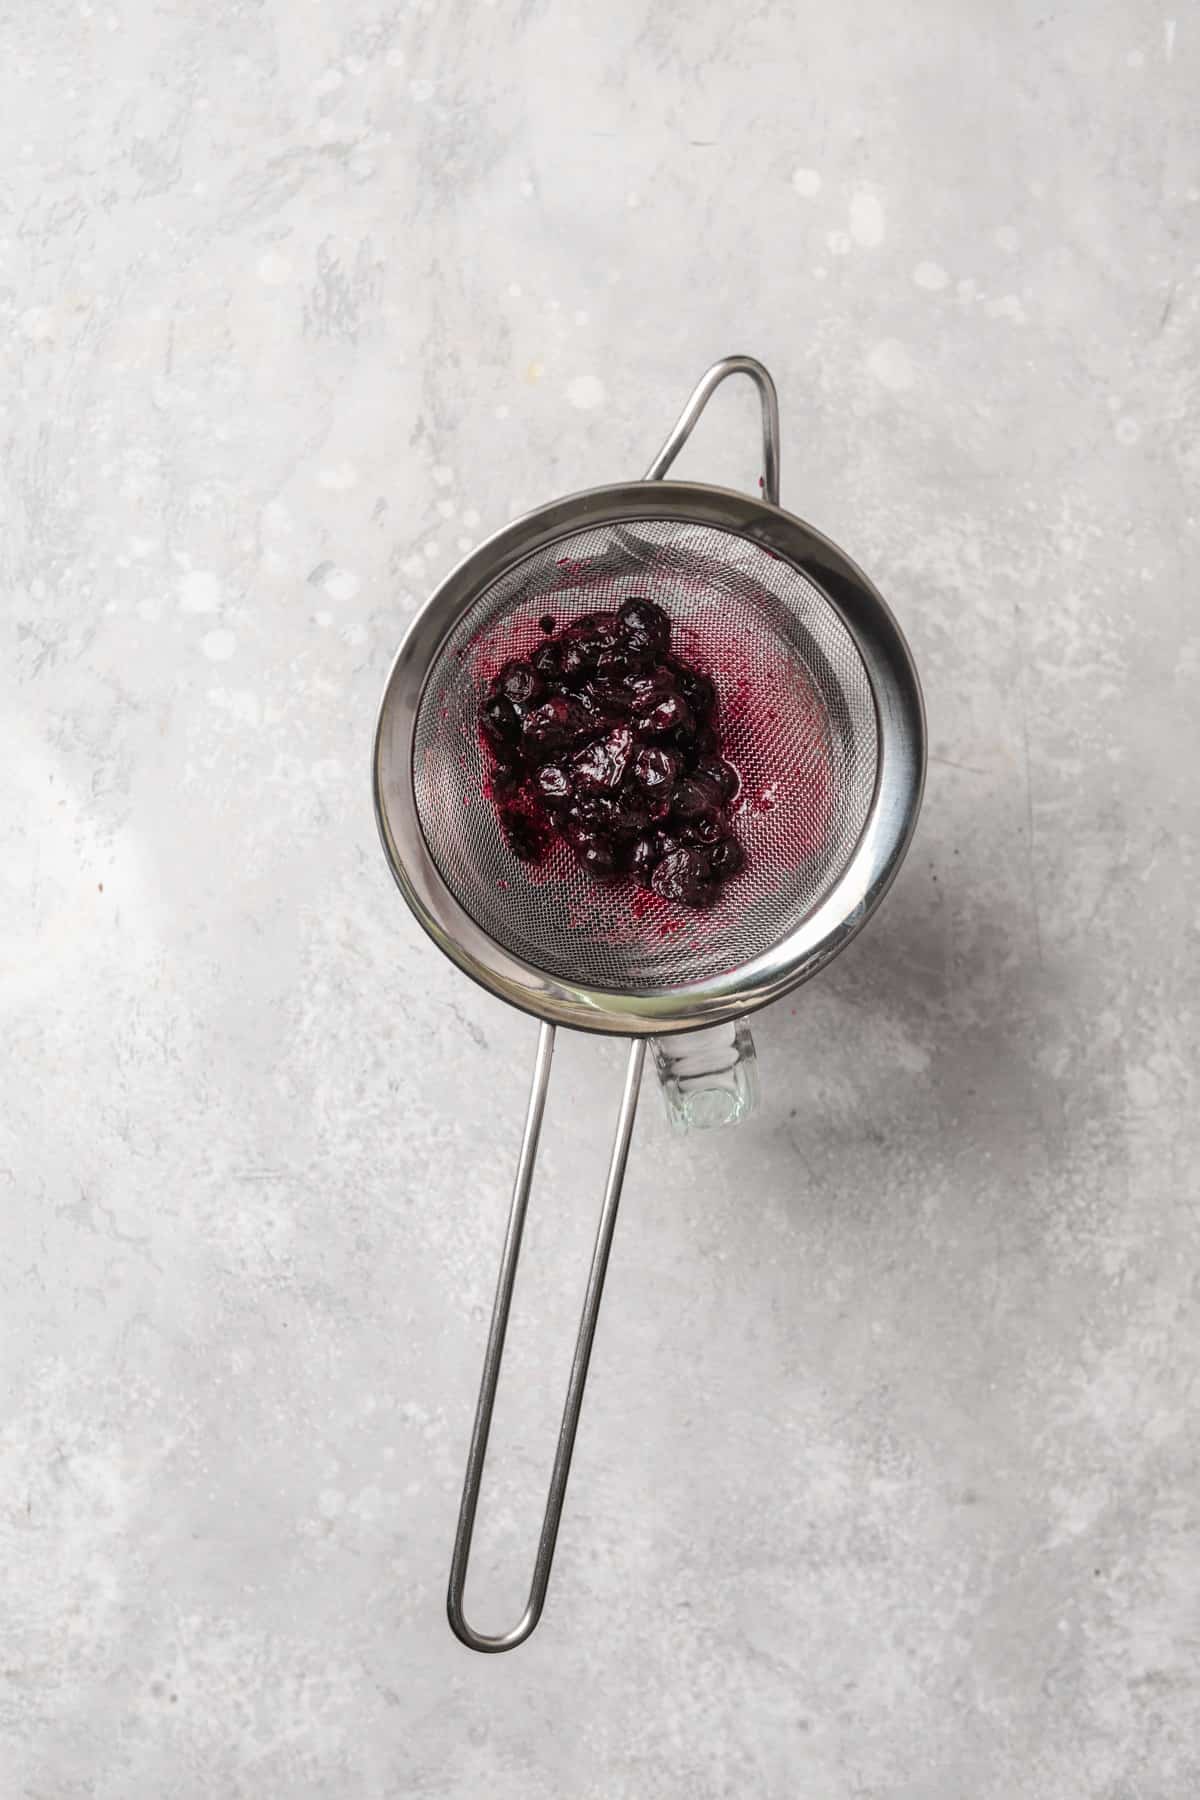 Blueberries in a sifter over a measuring cup.